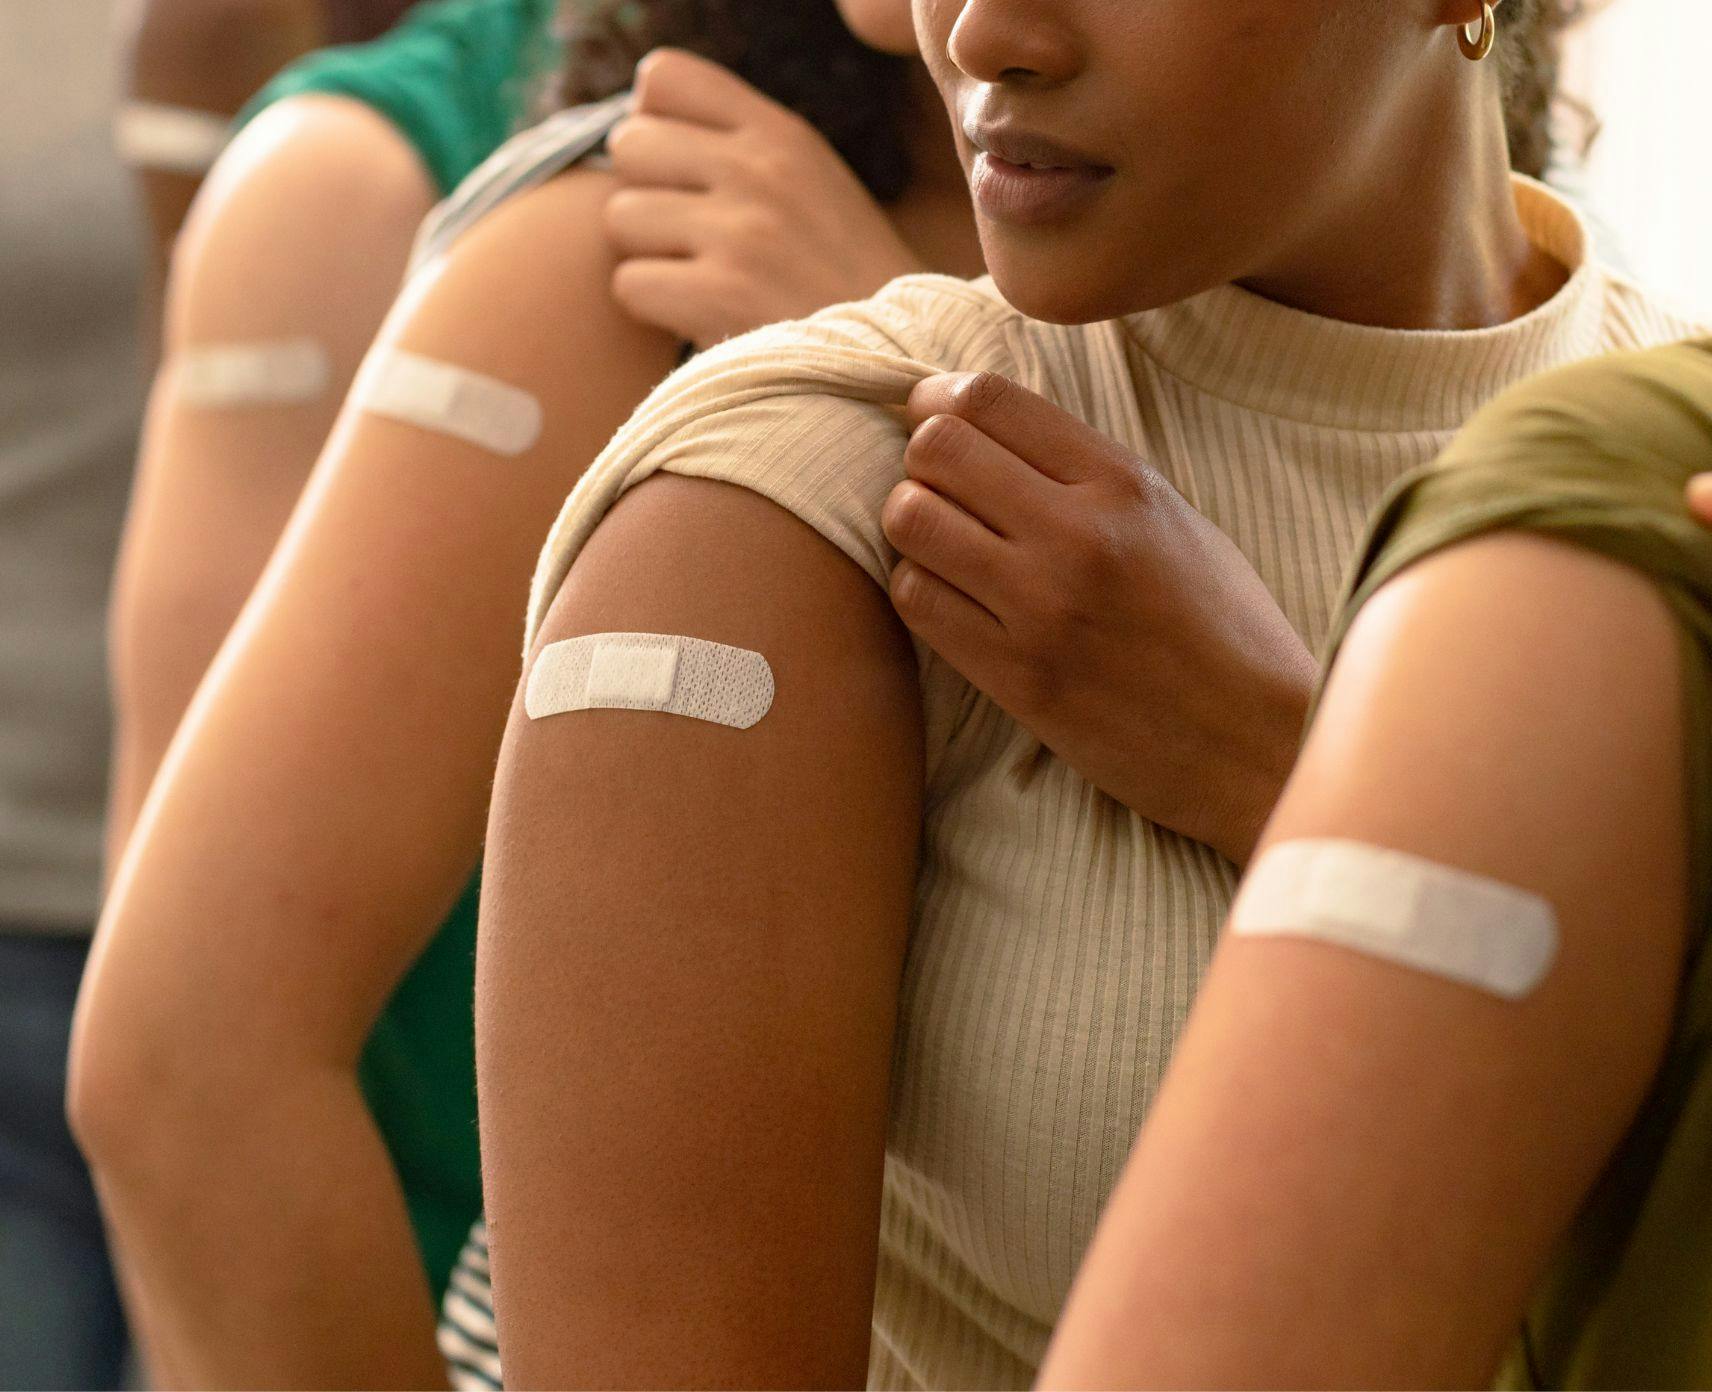 4 arms with band-aids on after vaccination